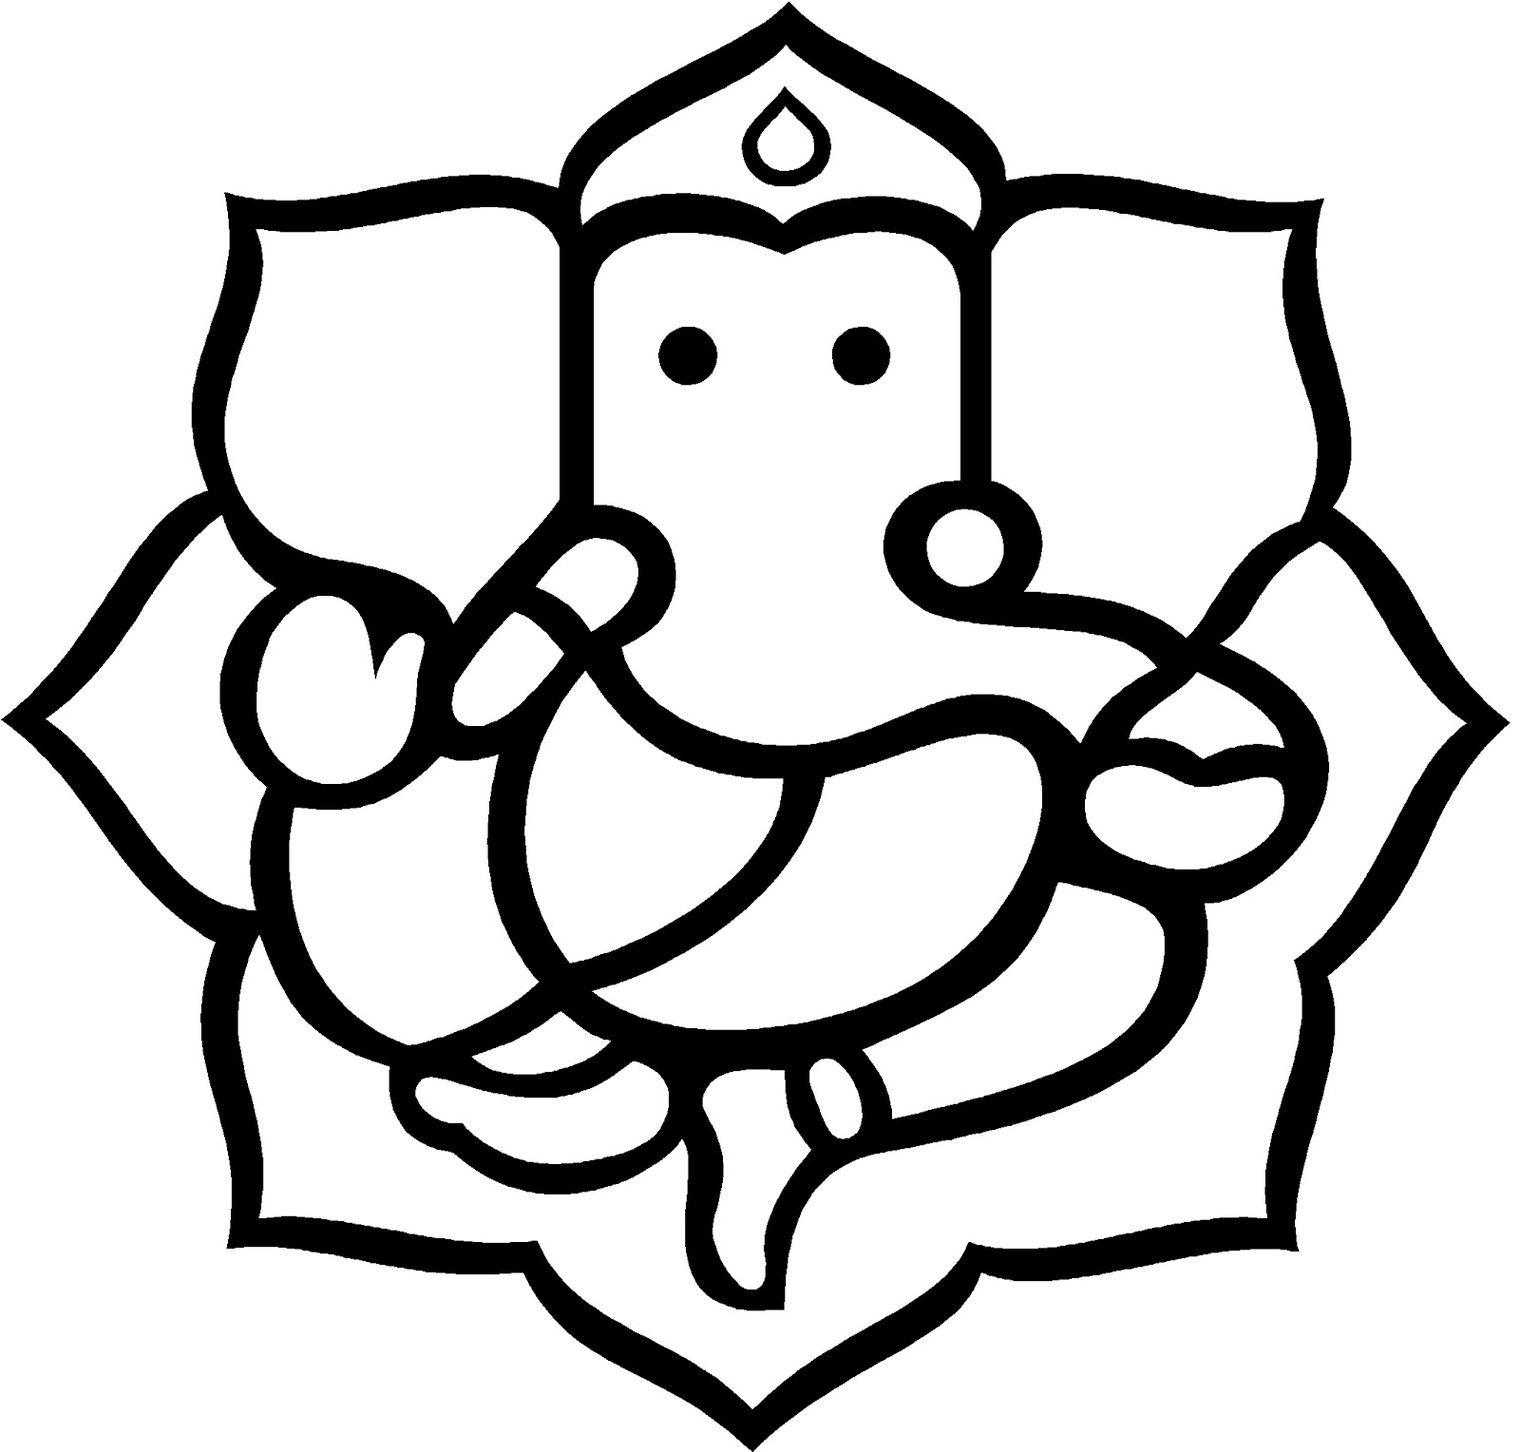 Simple Ganesh Clipart - Free to use Clip Art Resource - ClipArt Best